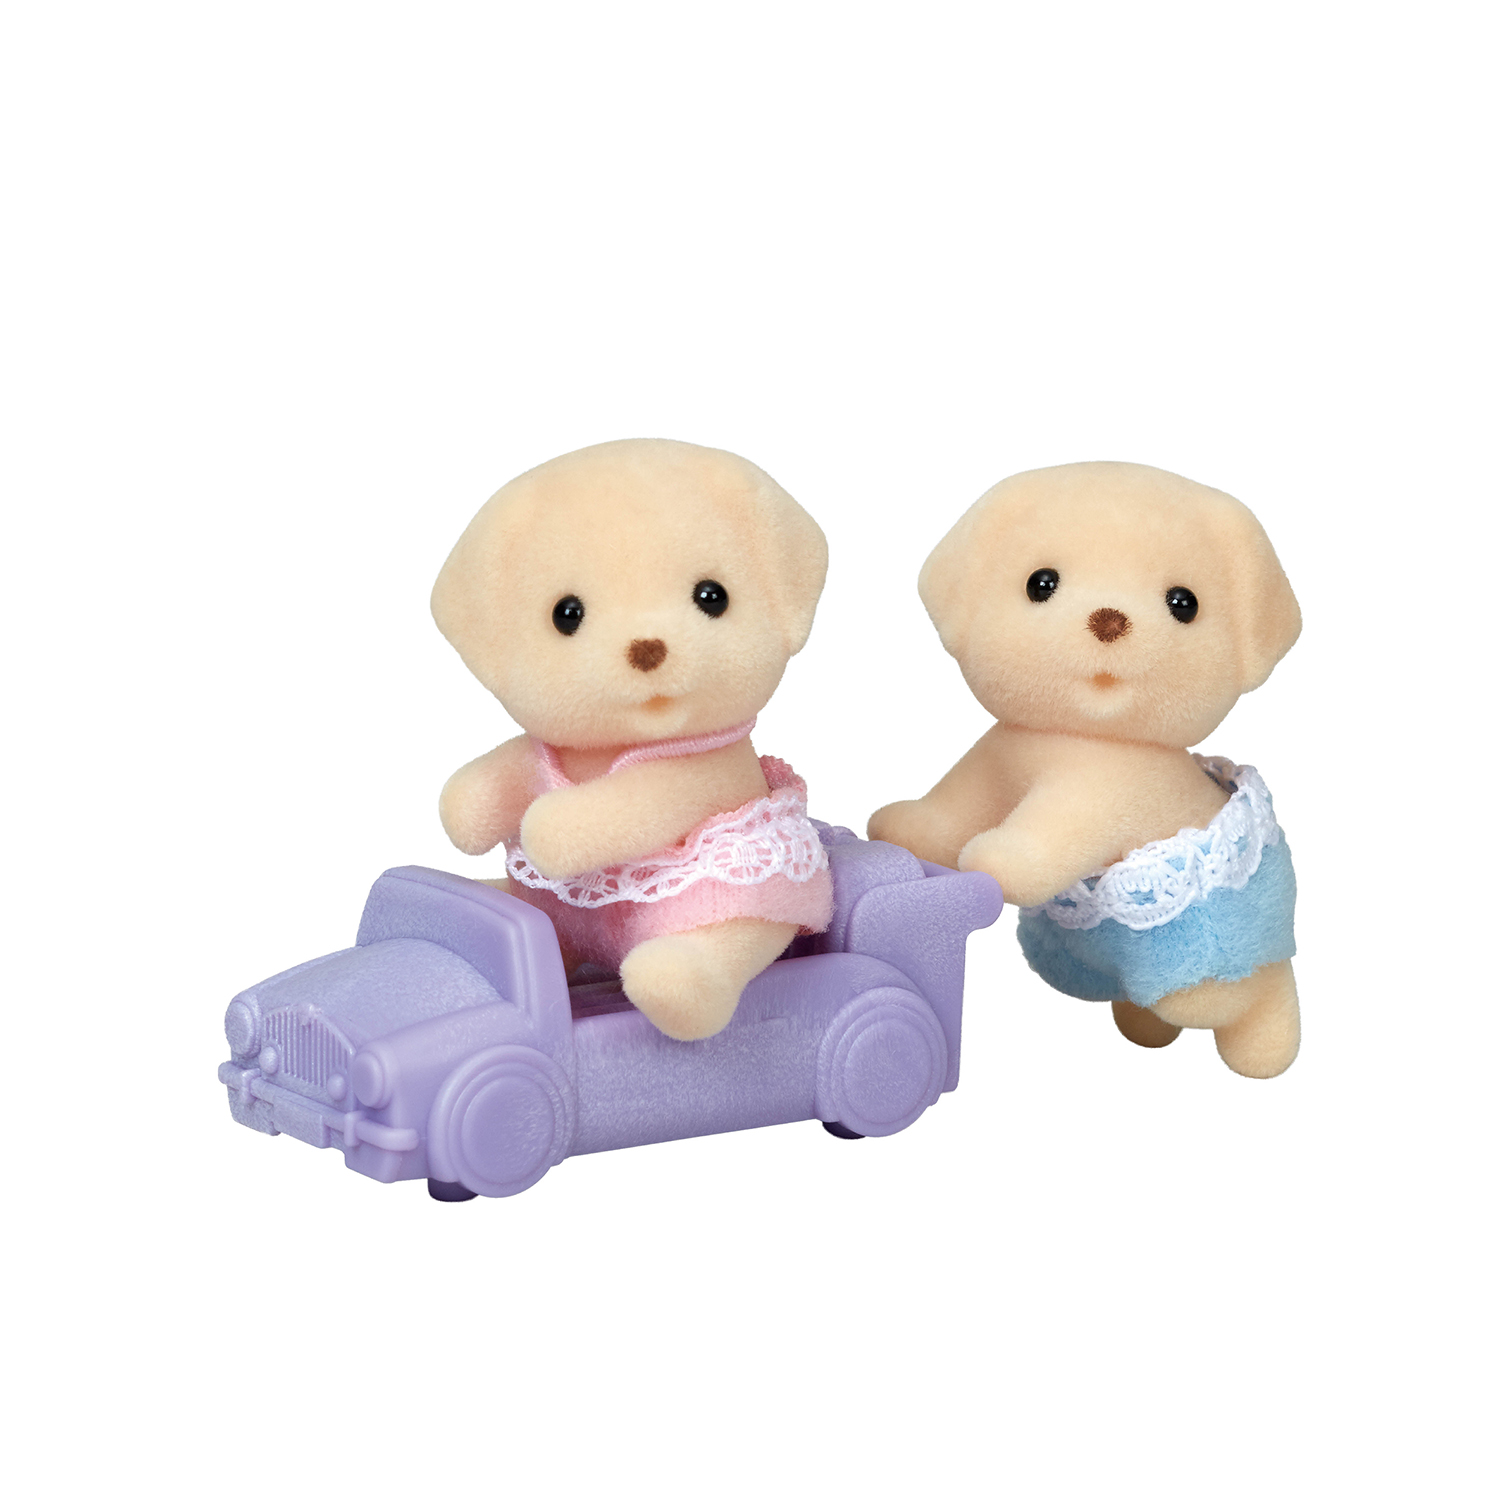 Calico Critters - Yellow Labrador Twins - image 1 of 4